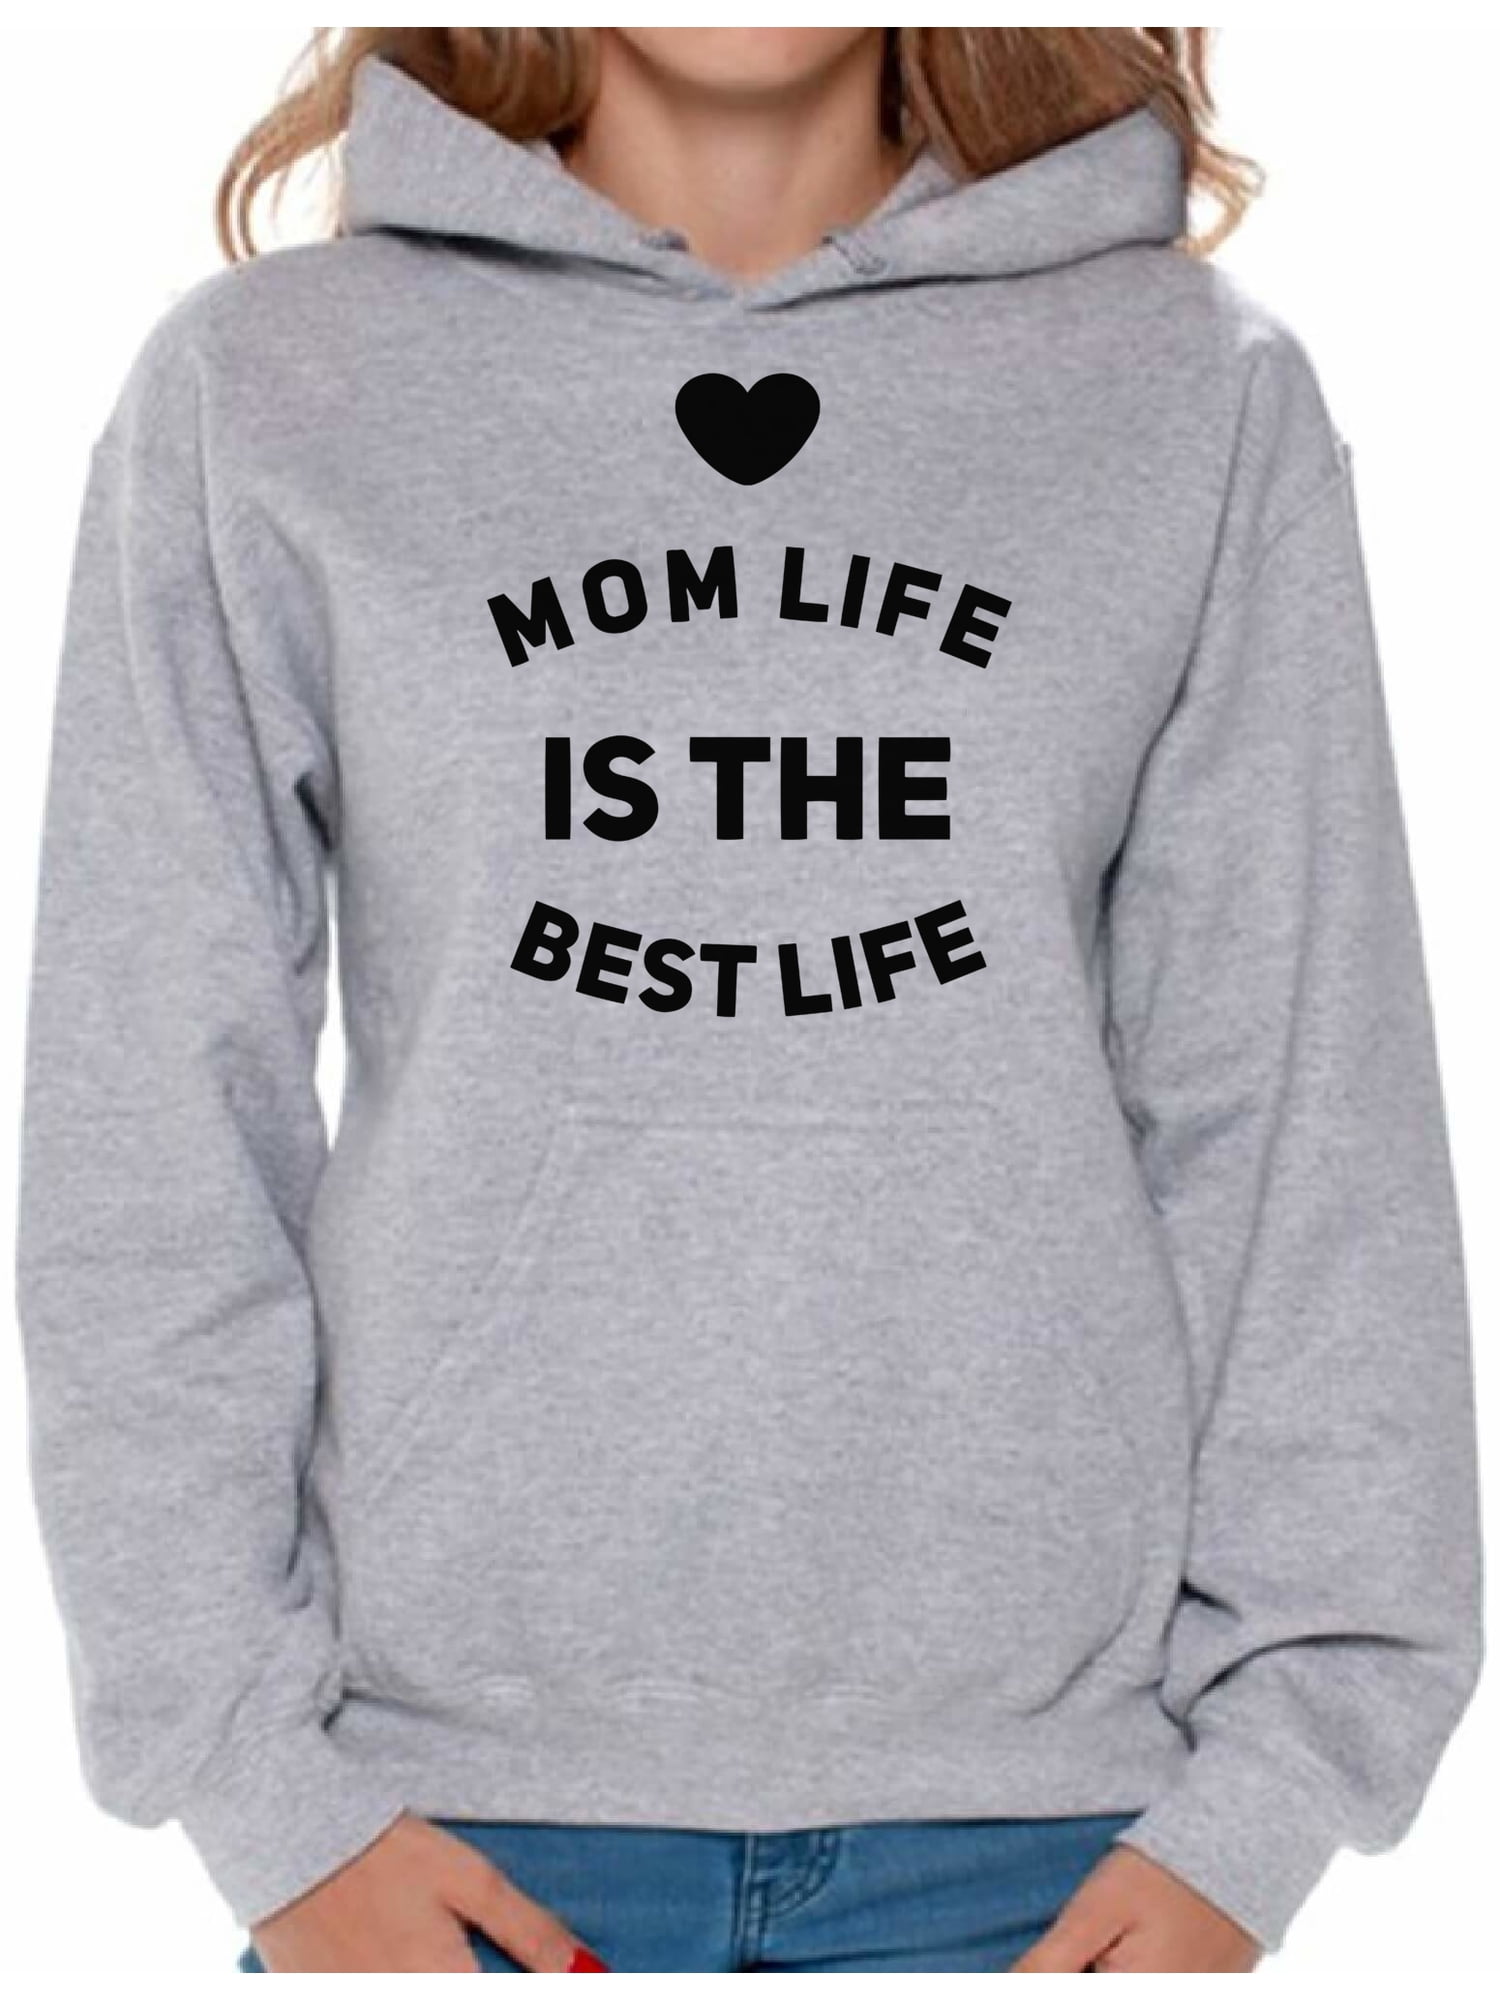 Awkward Styles Womens Mom of Boys AF Sweatshirt Crewneck Mom of Boys Great Gifts for Mothers Day